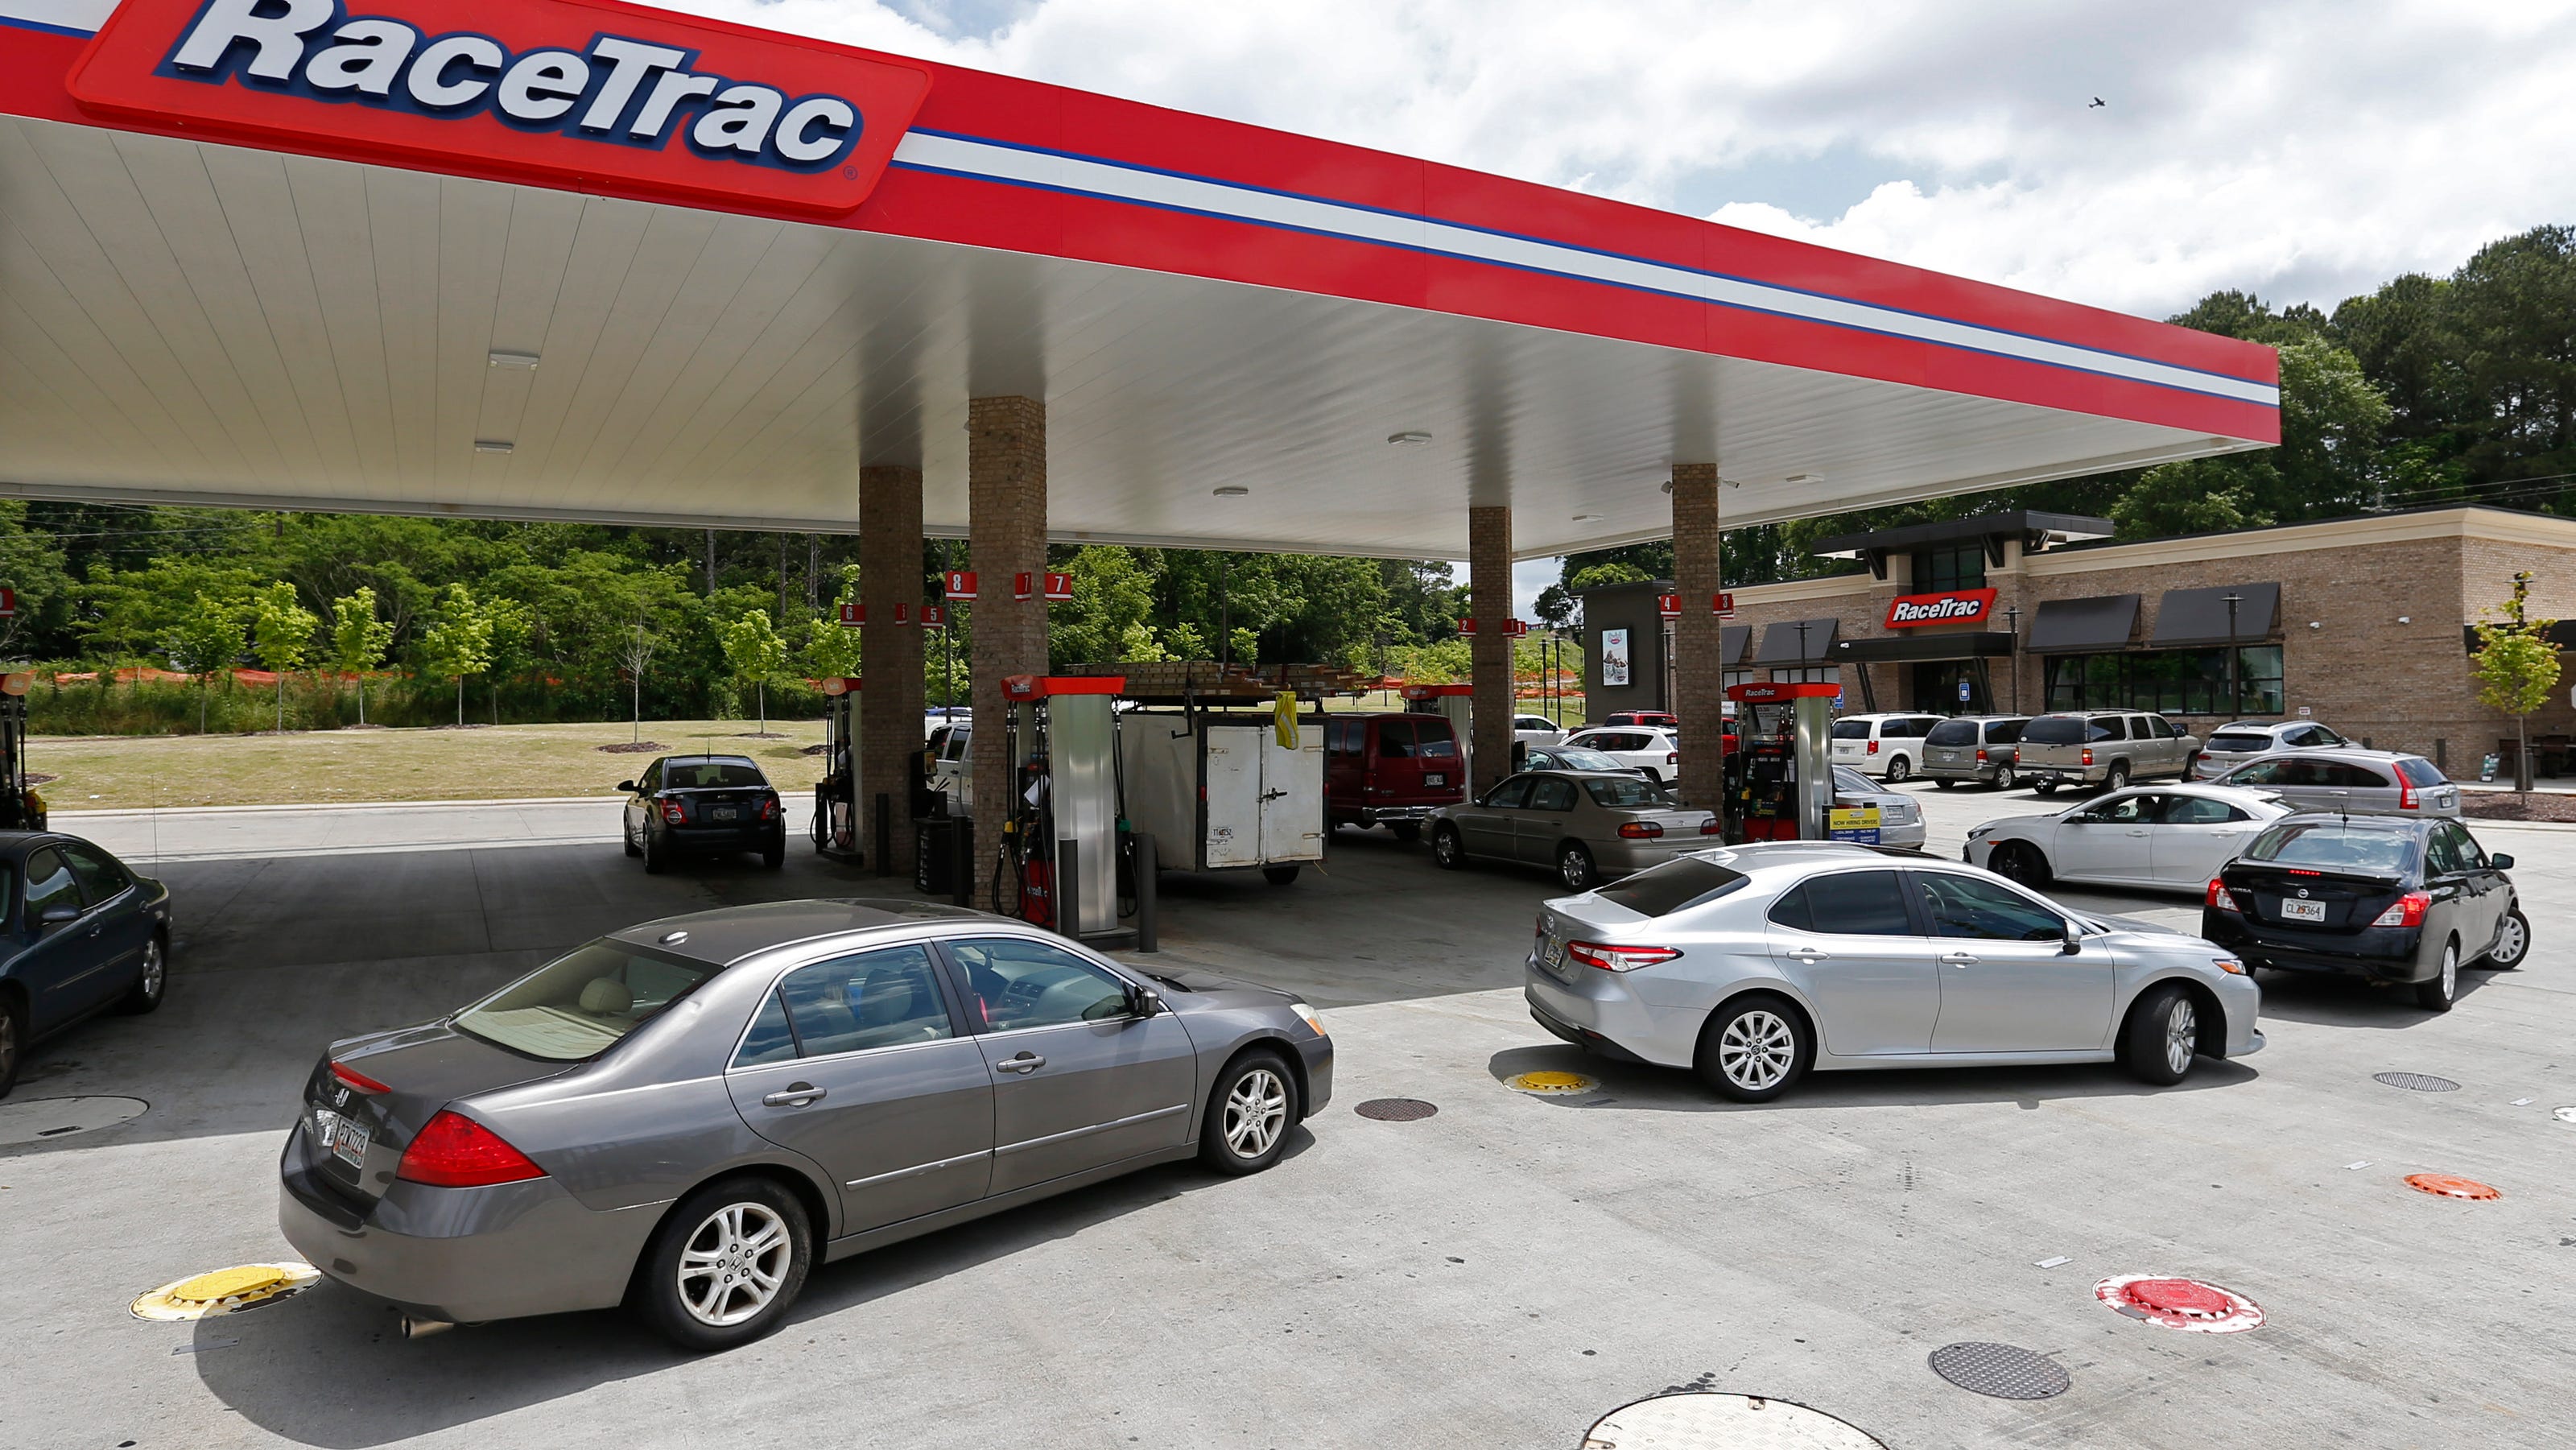 GasBuddy prices Athens GA: Find cheapest fuel prices in the area